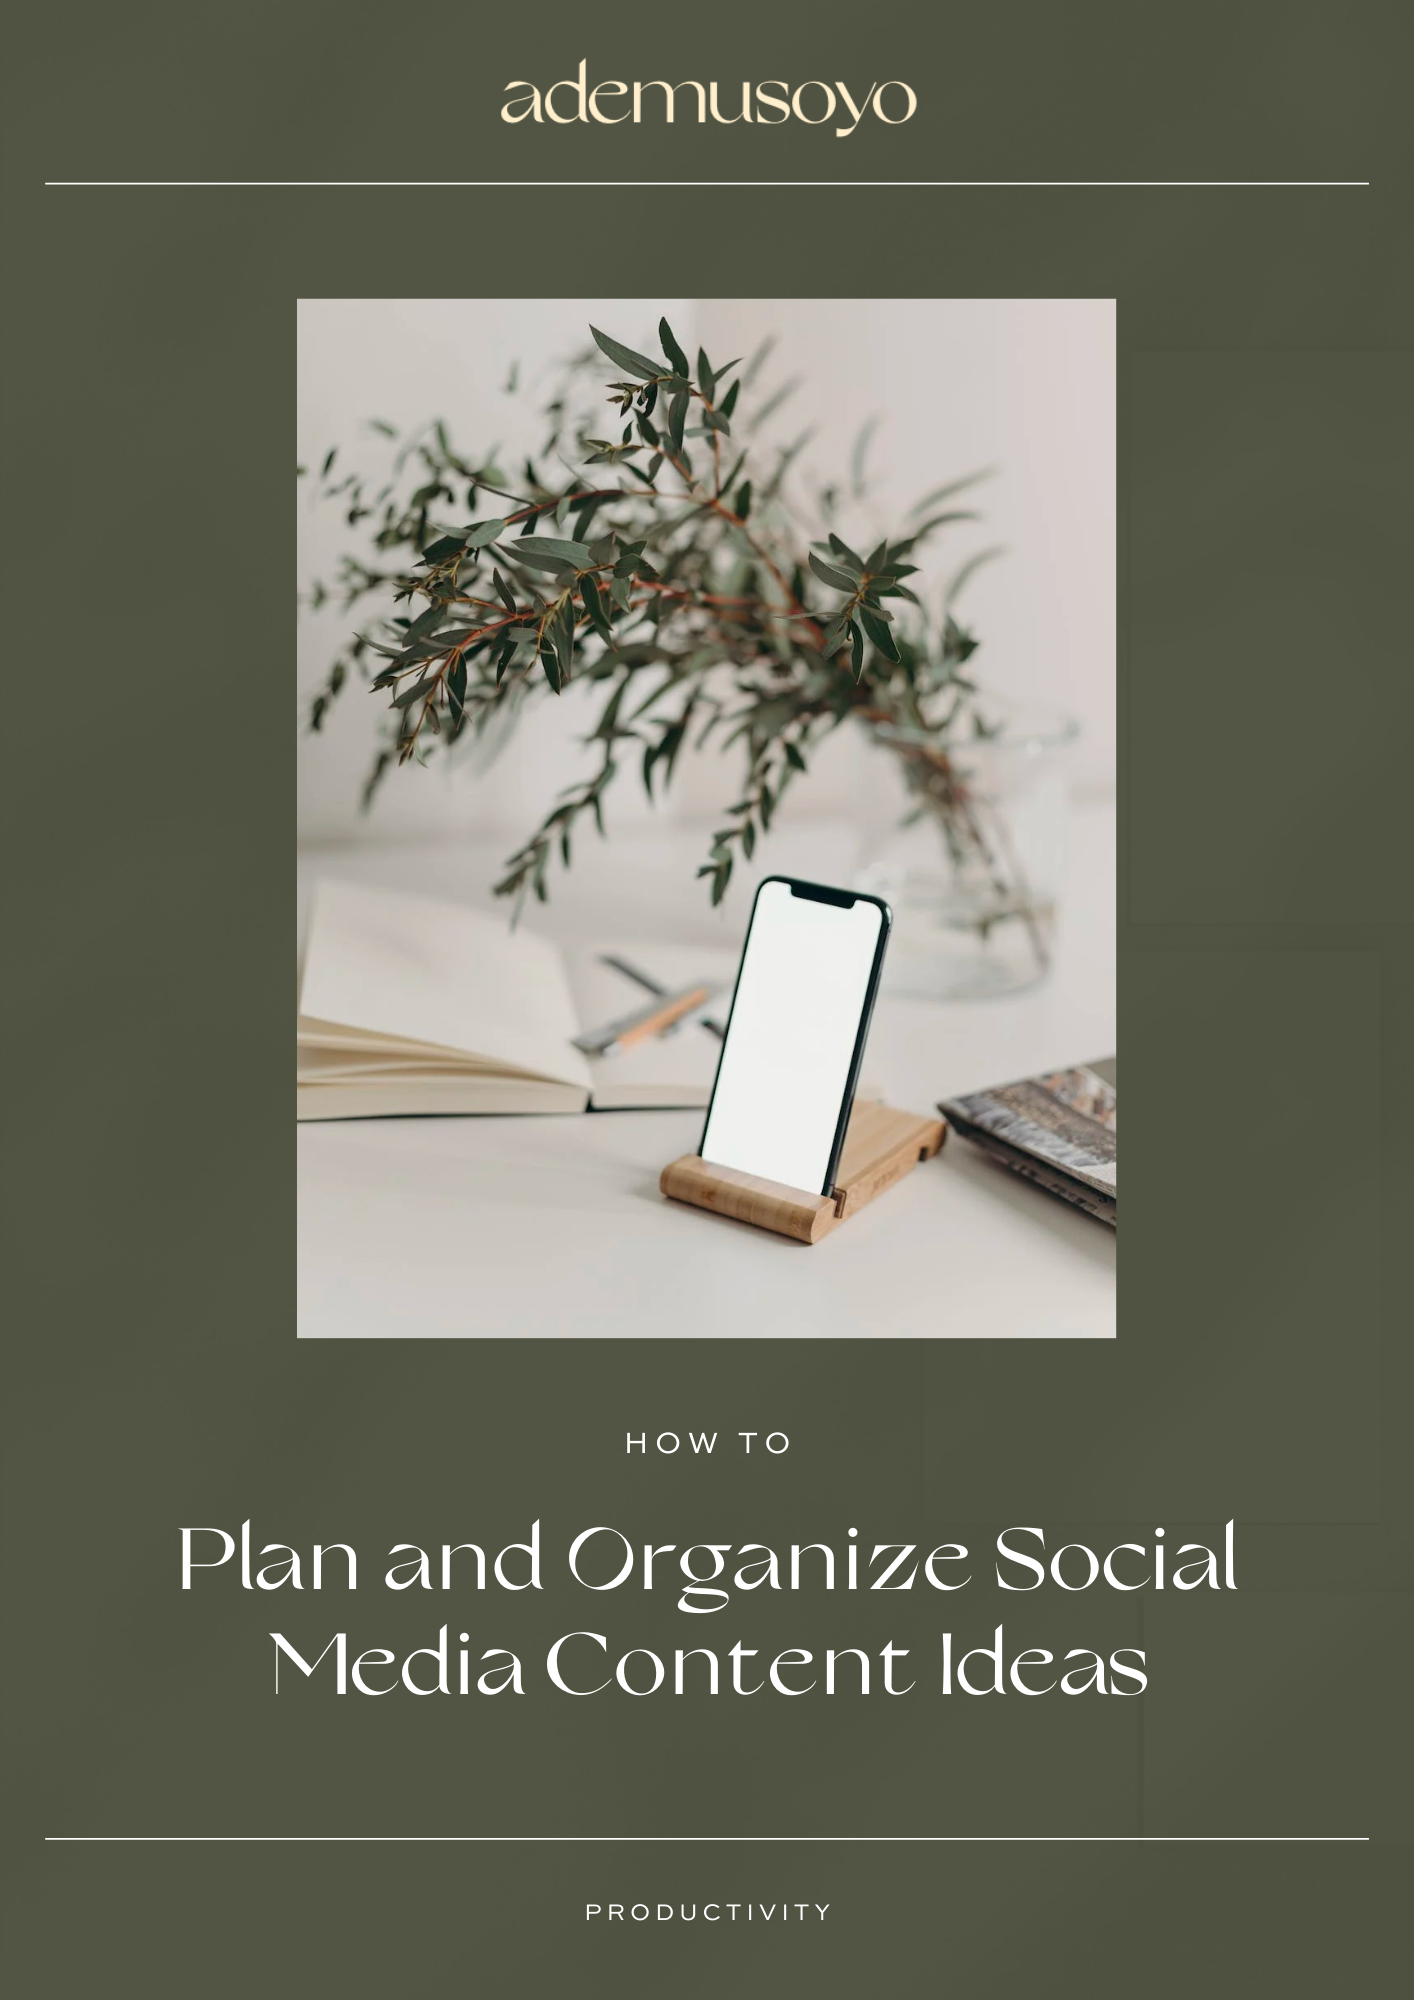 a mobile phone on a mobile phone stand and an overlay text on a green background that says "how to plan and organize social media content ideas", social media content scheduling, manage social media content